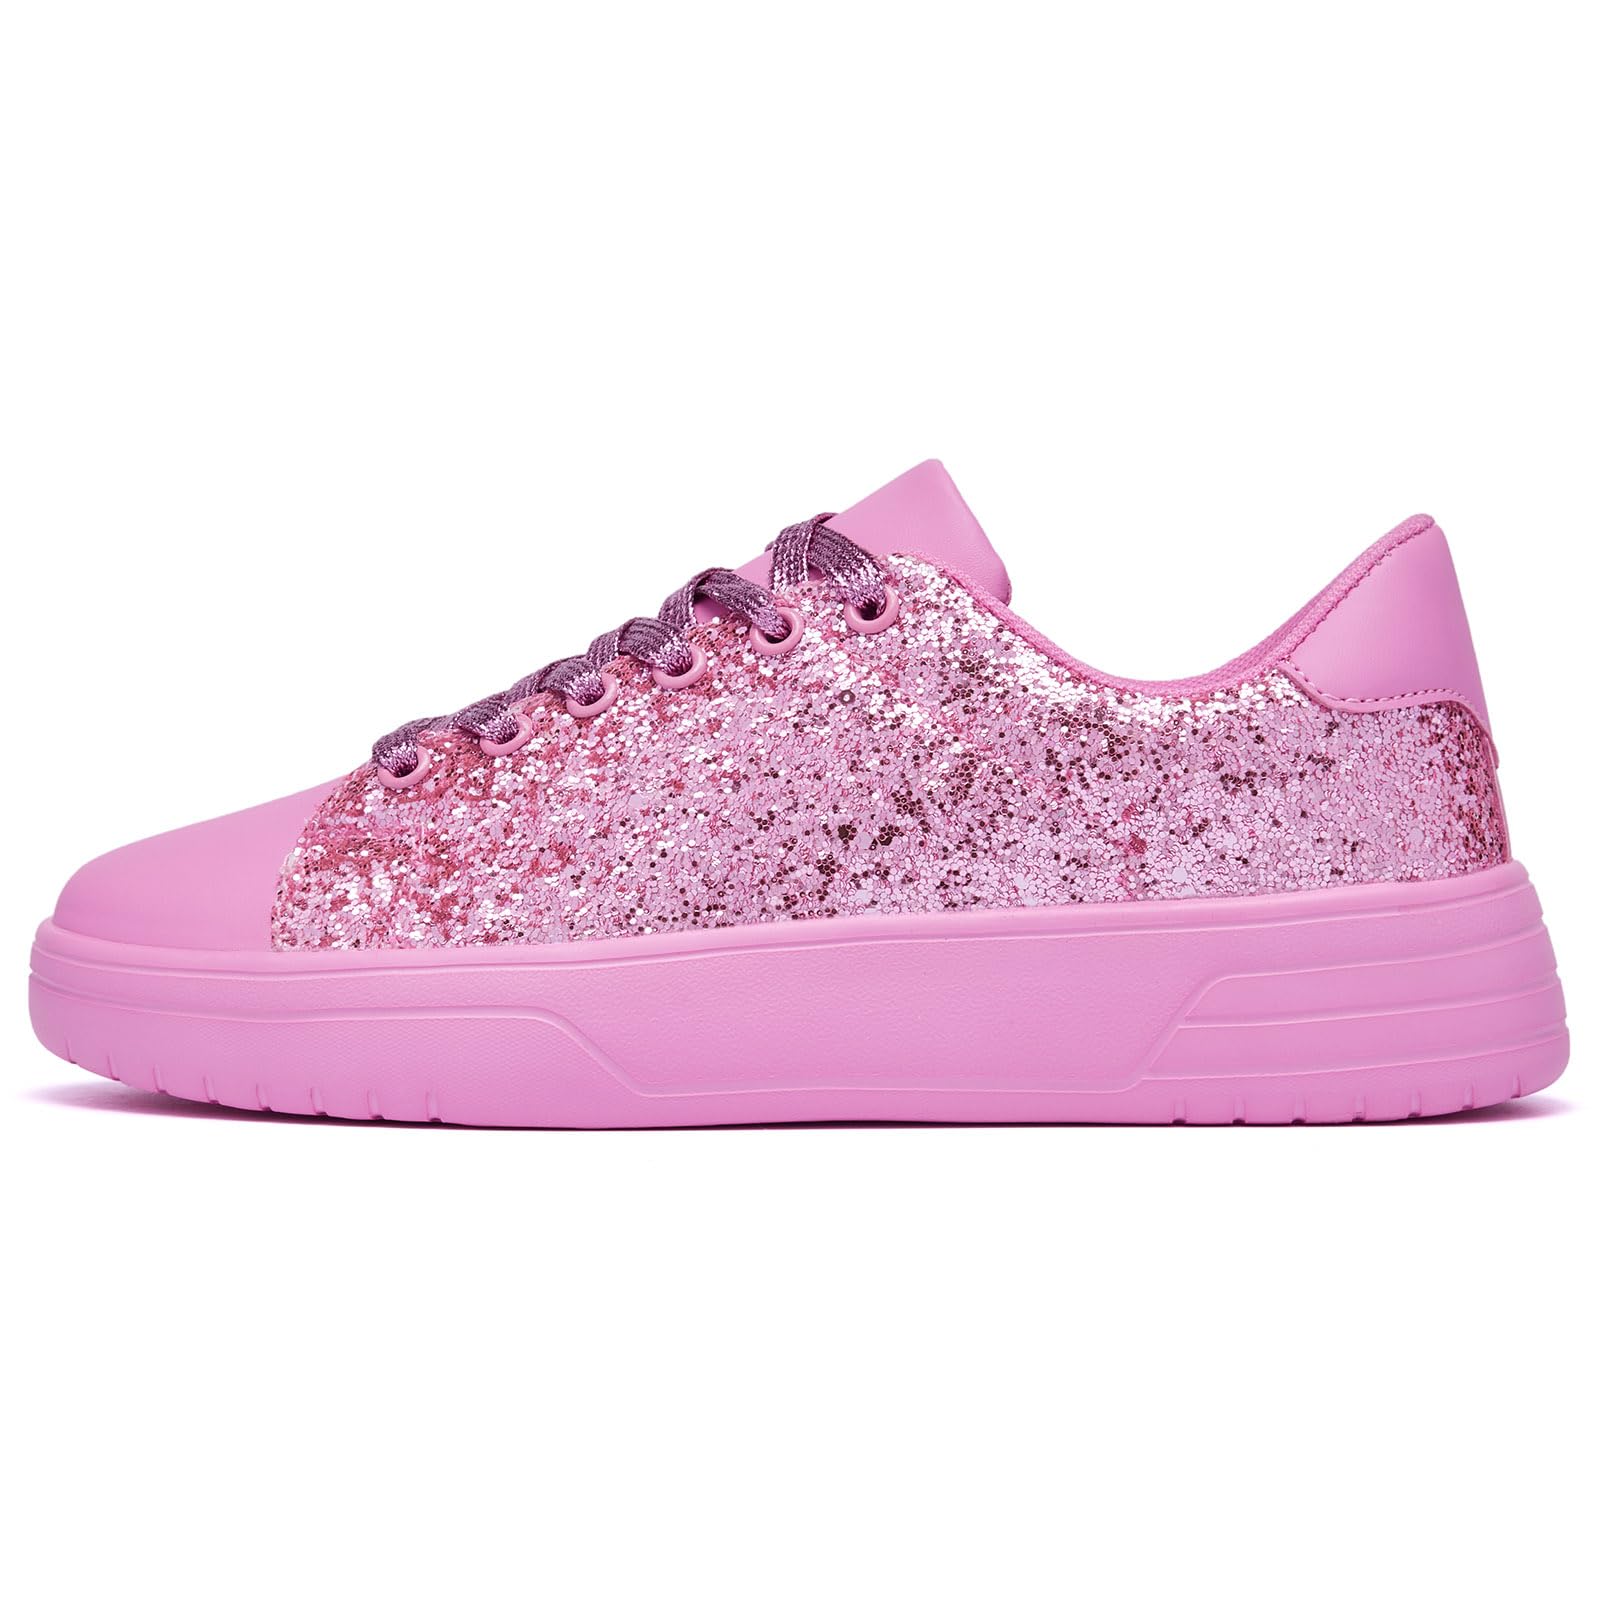 Women's Glitter Sneakers Shiny Sequin Tennis Rhinestone Bling Fashion Sneaker Sparkly Walking Casual Lace Up Shoes Pink